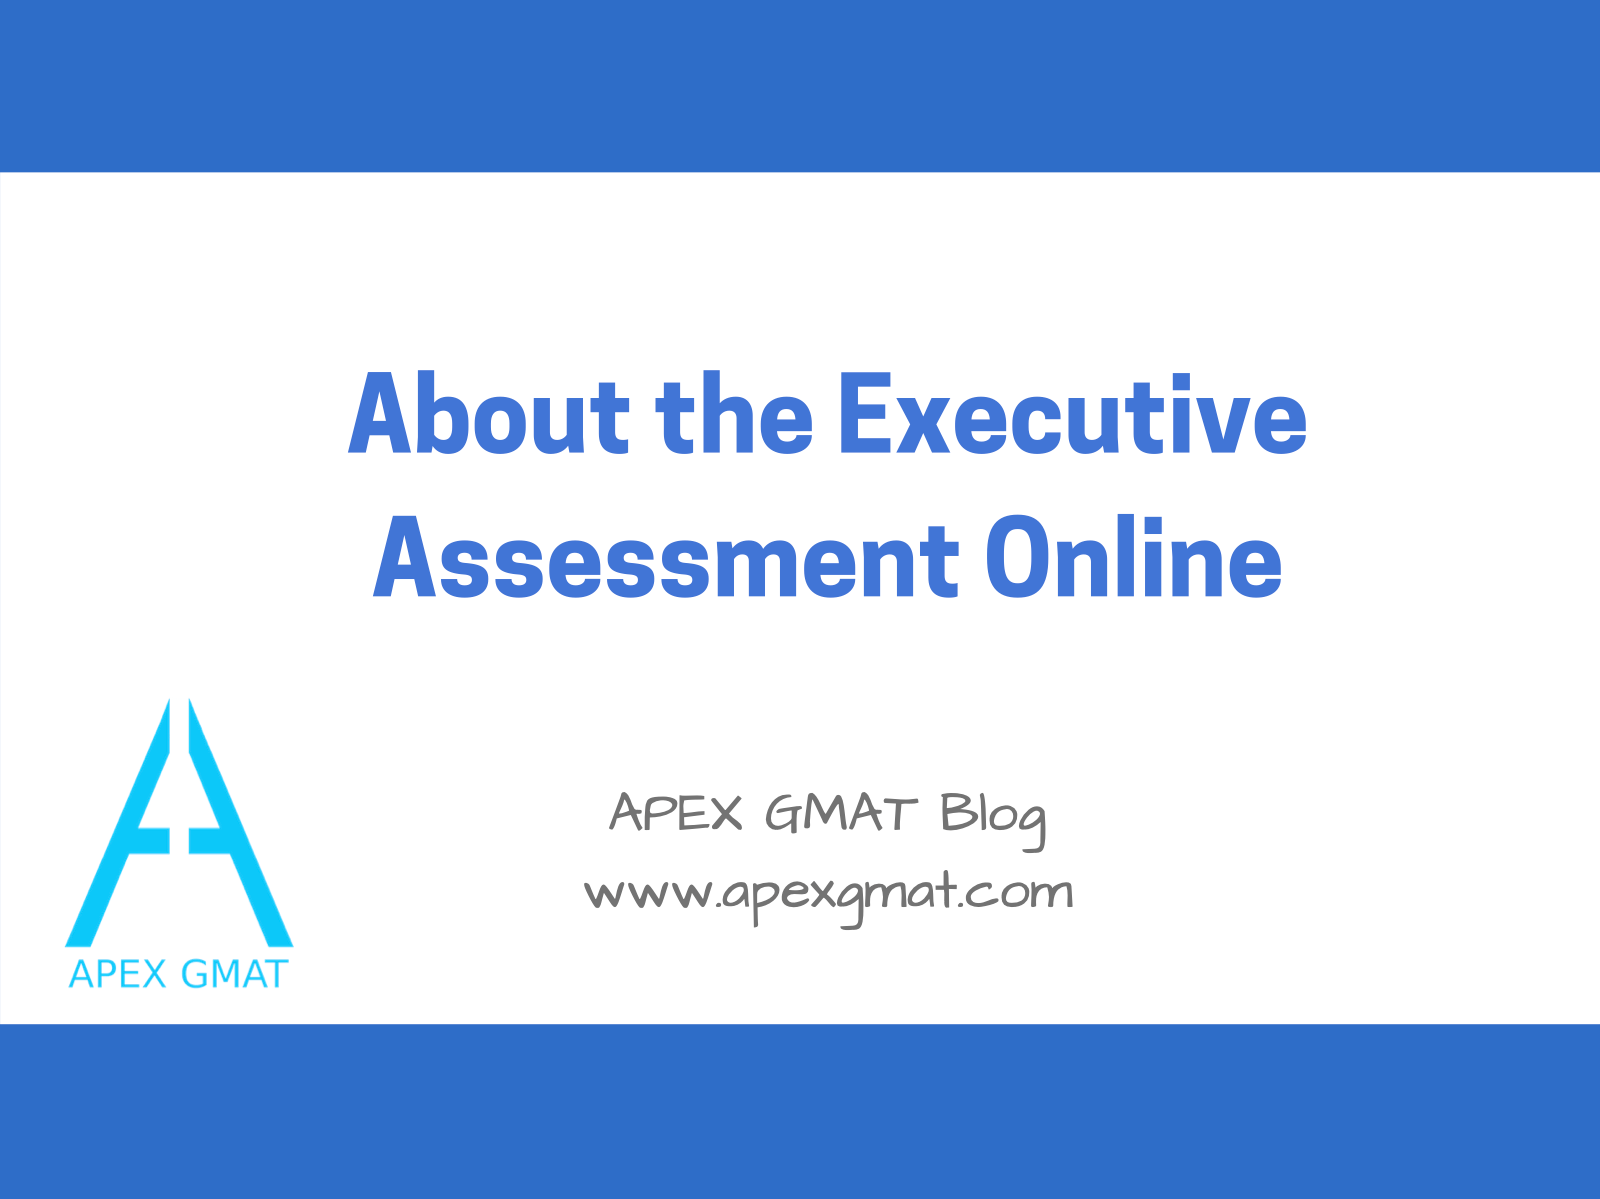 All You Need To Know About The Executive Assessment Online